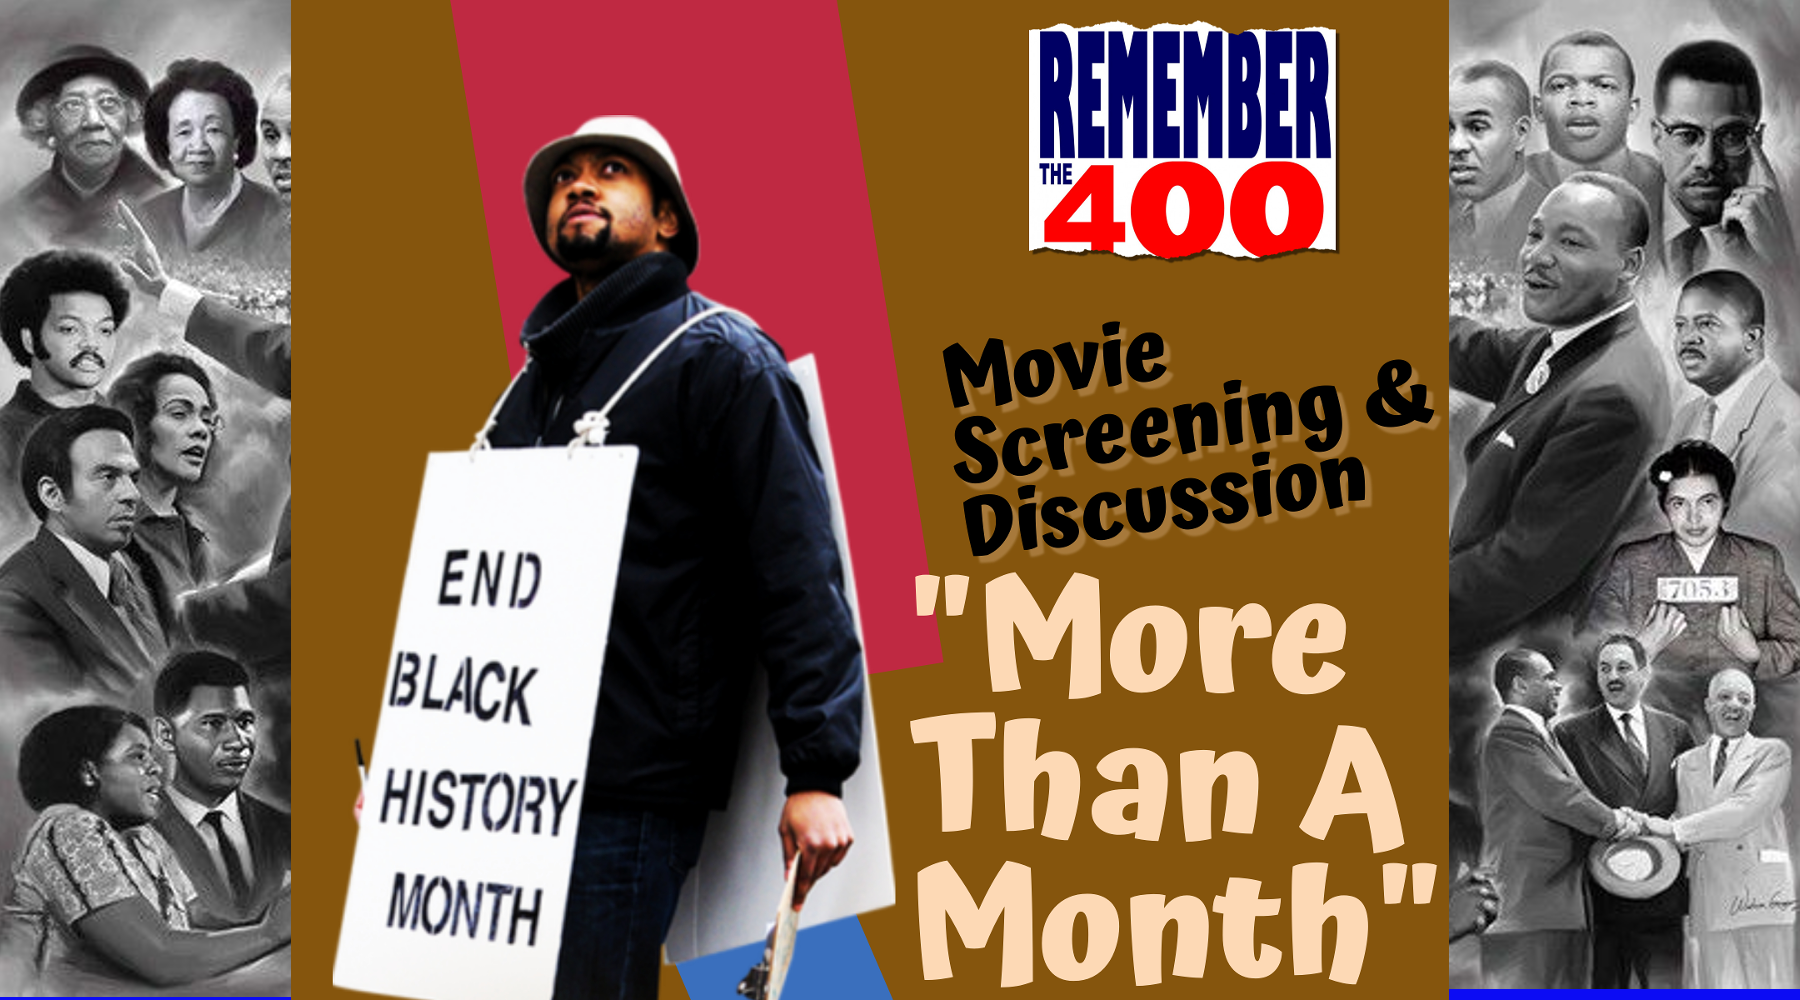 More Than A Month - Movie Screening & Discussion